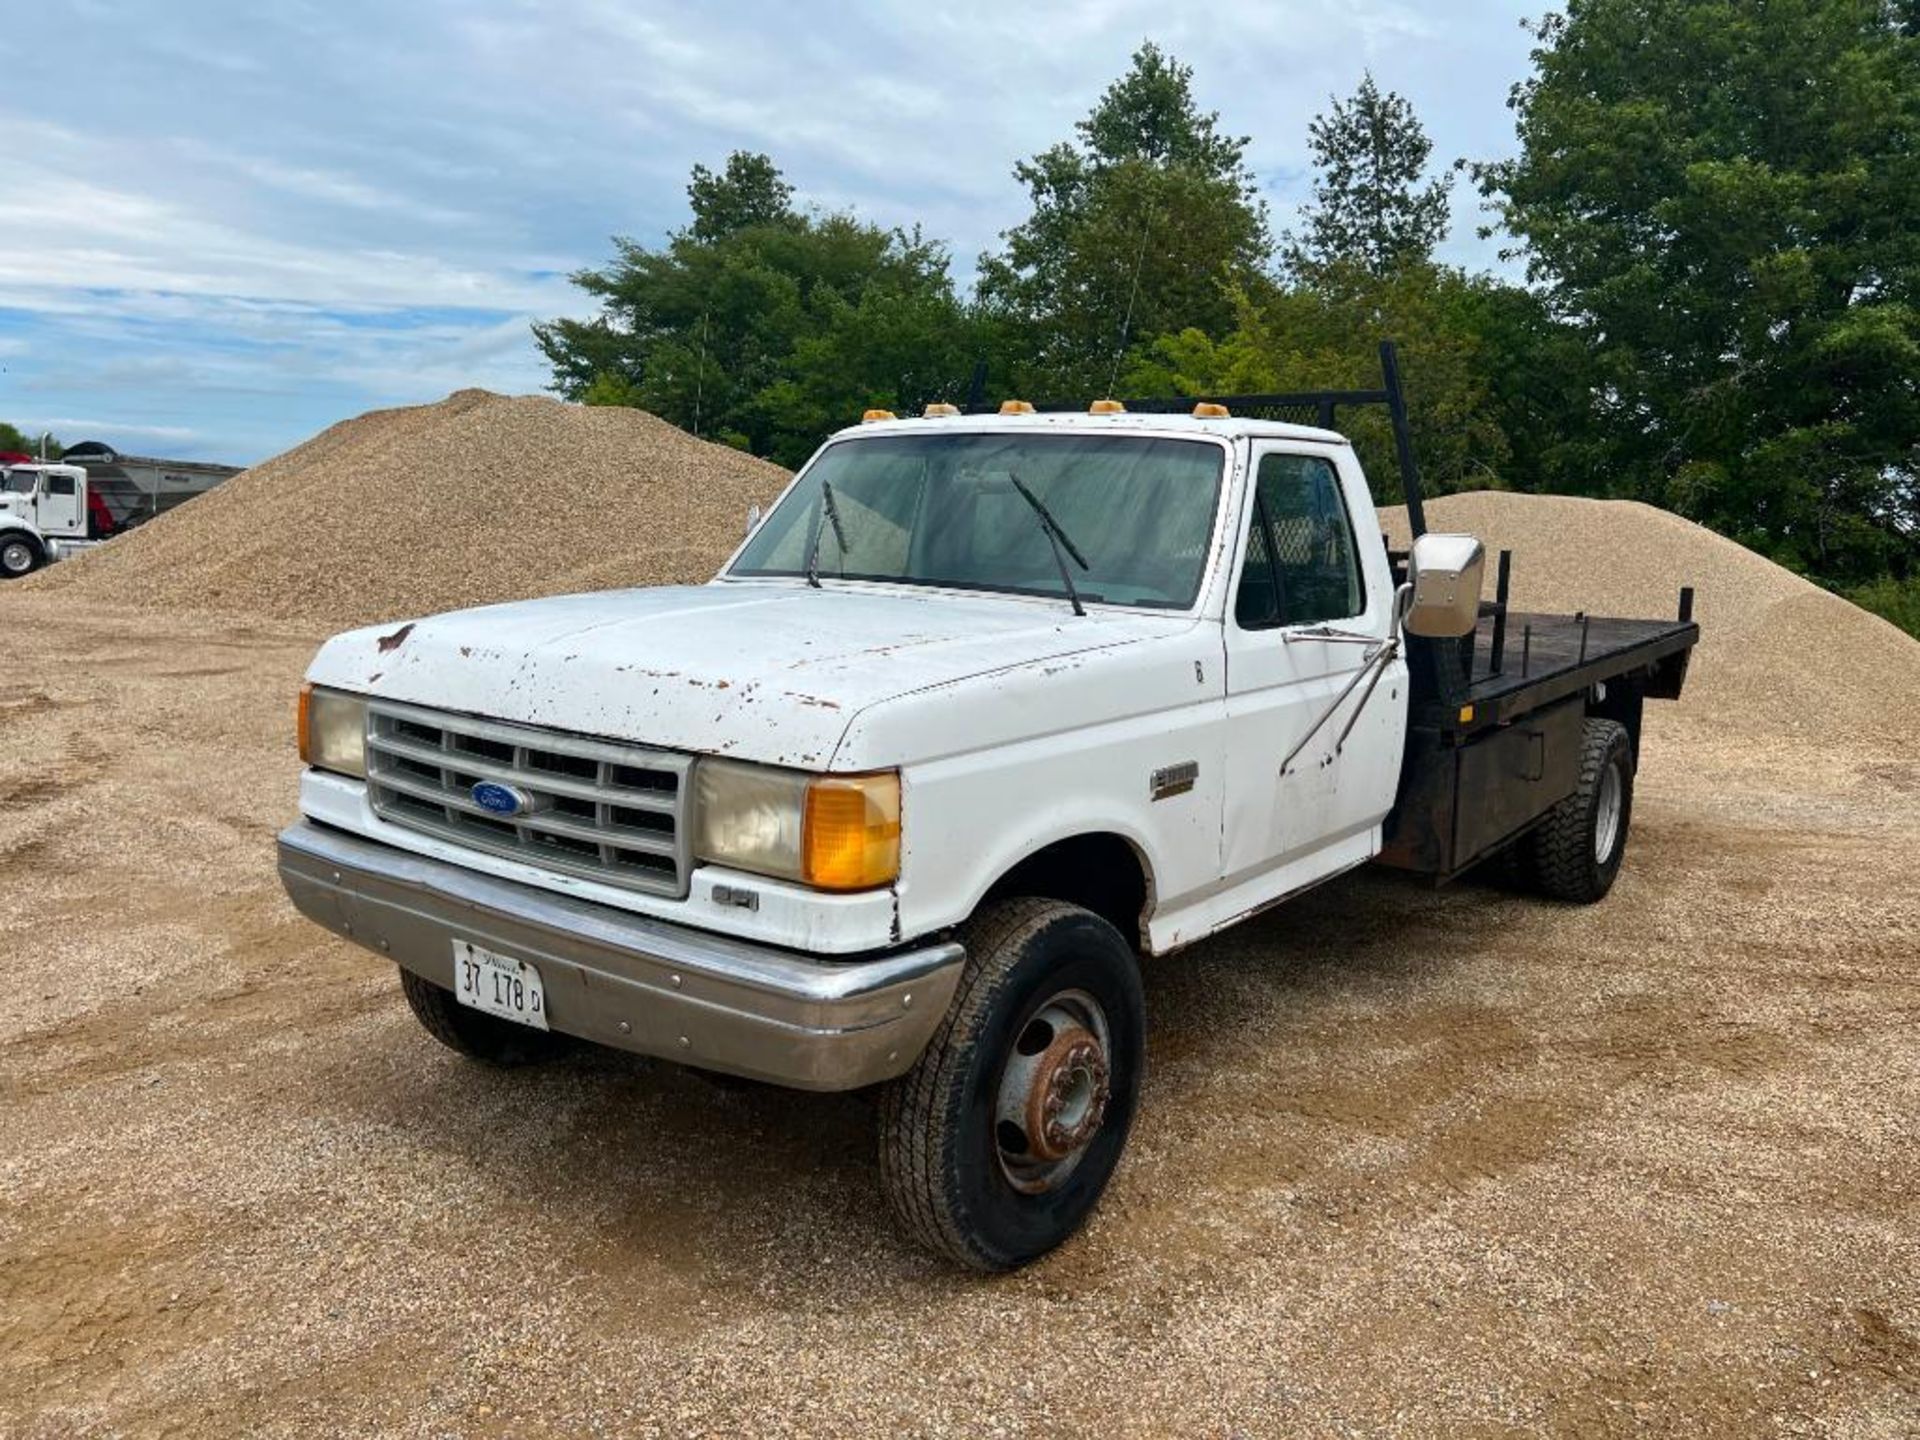 1989 Ford Dually Flat Bed Truck, VIN #2FDLF4763KCB49239, Miles 72,251, Manual Transmission, 460 Gas